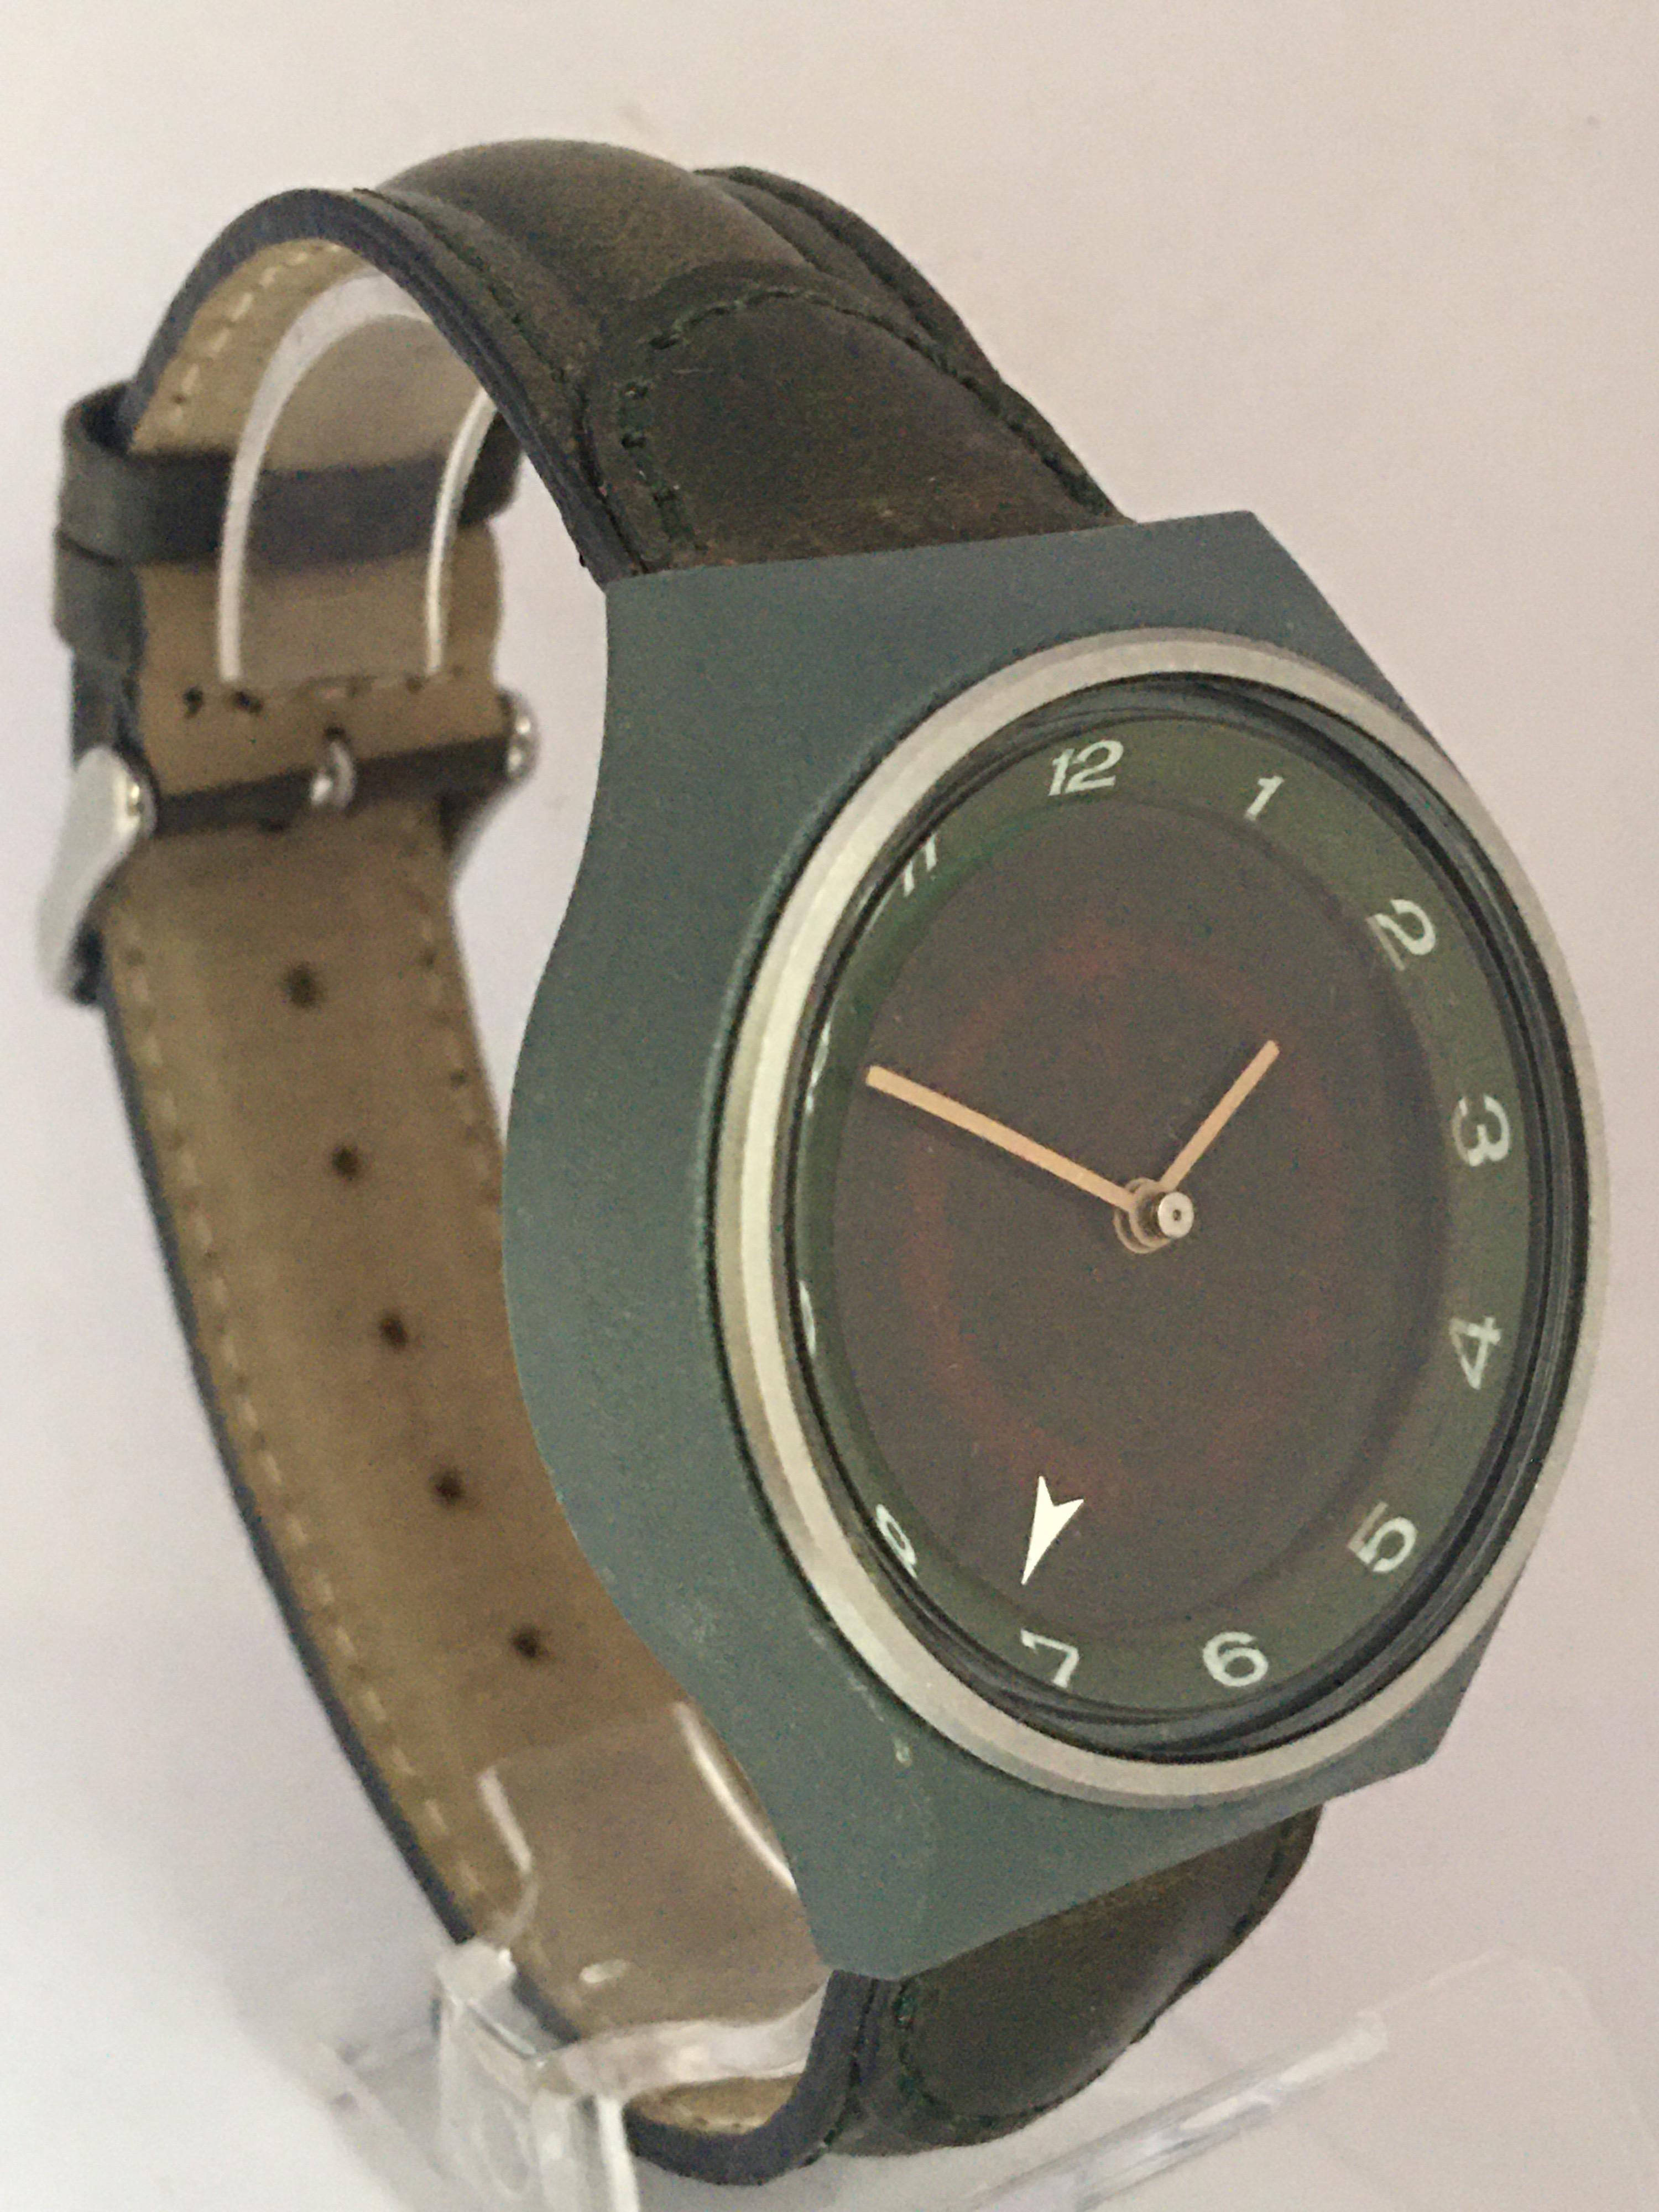 This beautiful vintage Swiss made hand winding watch is in good working condition and it is running well. (Keeps a good time.) Visible signs of ageing and wear with small light marks on the glass as shown. Its Noryl green case and fiber glass is in